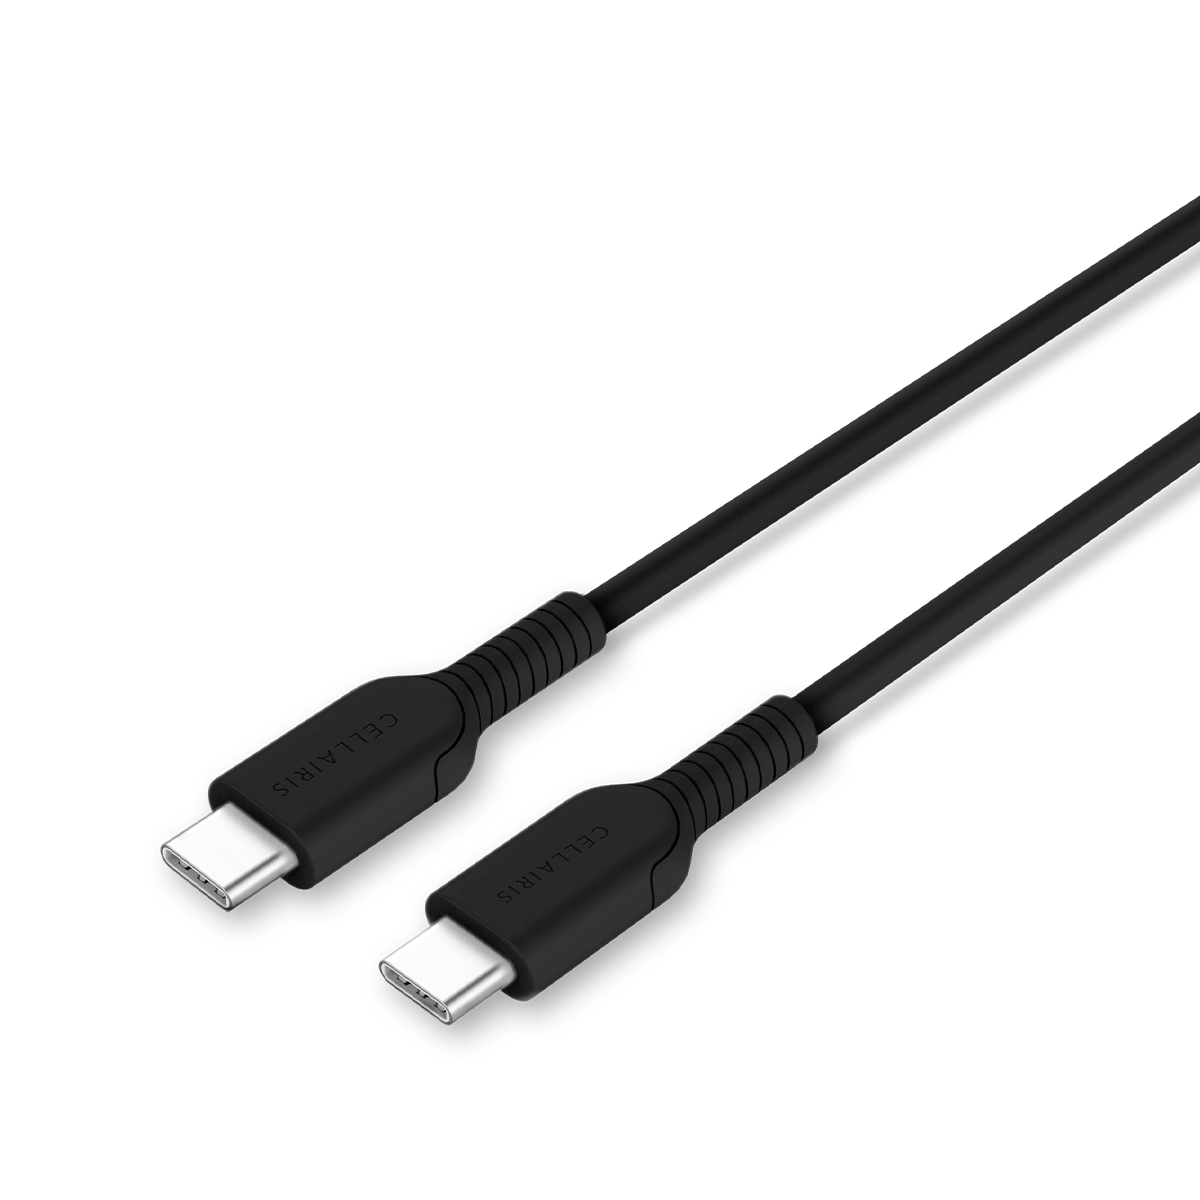 Charge Cable - 3FT USB-C to USB-C Black Power